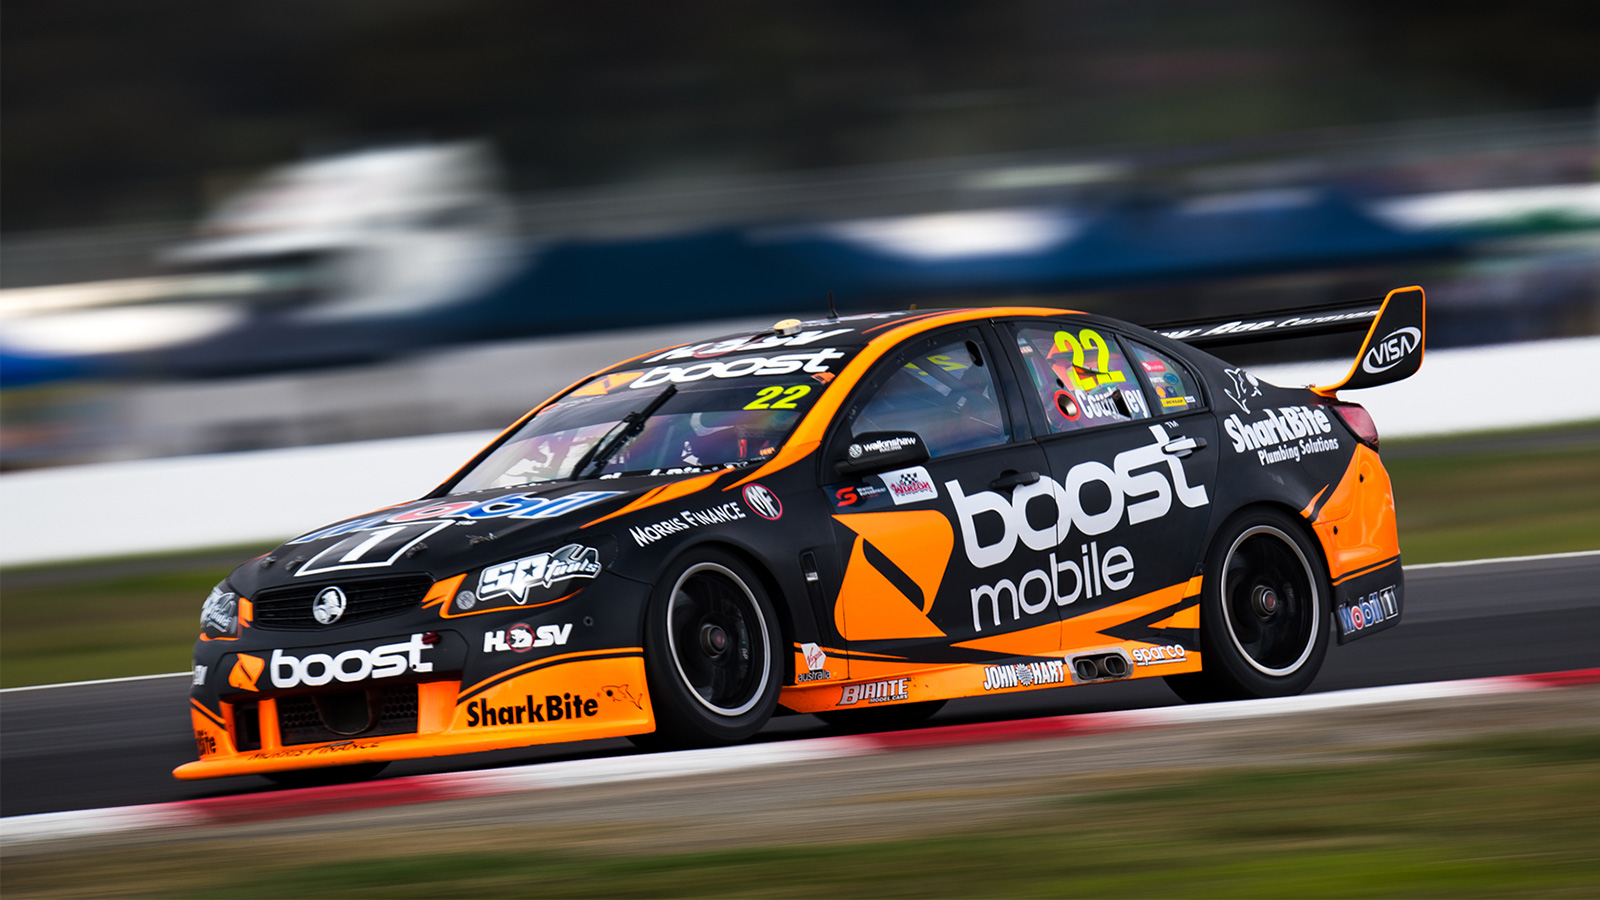 James Courtney picked up 19 spots before being turned around.